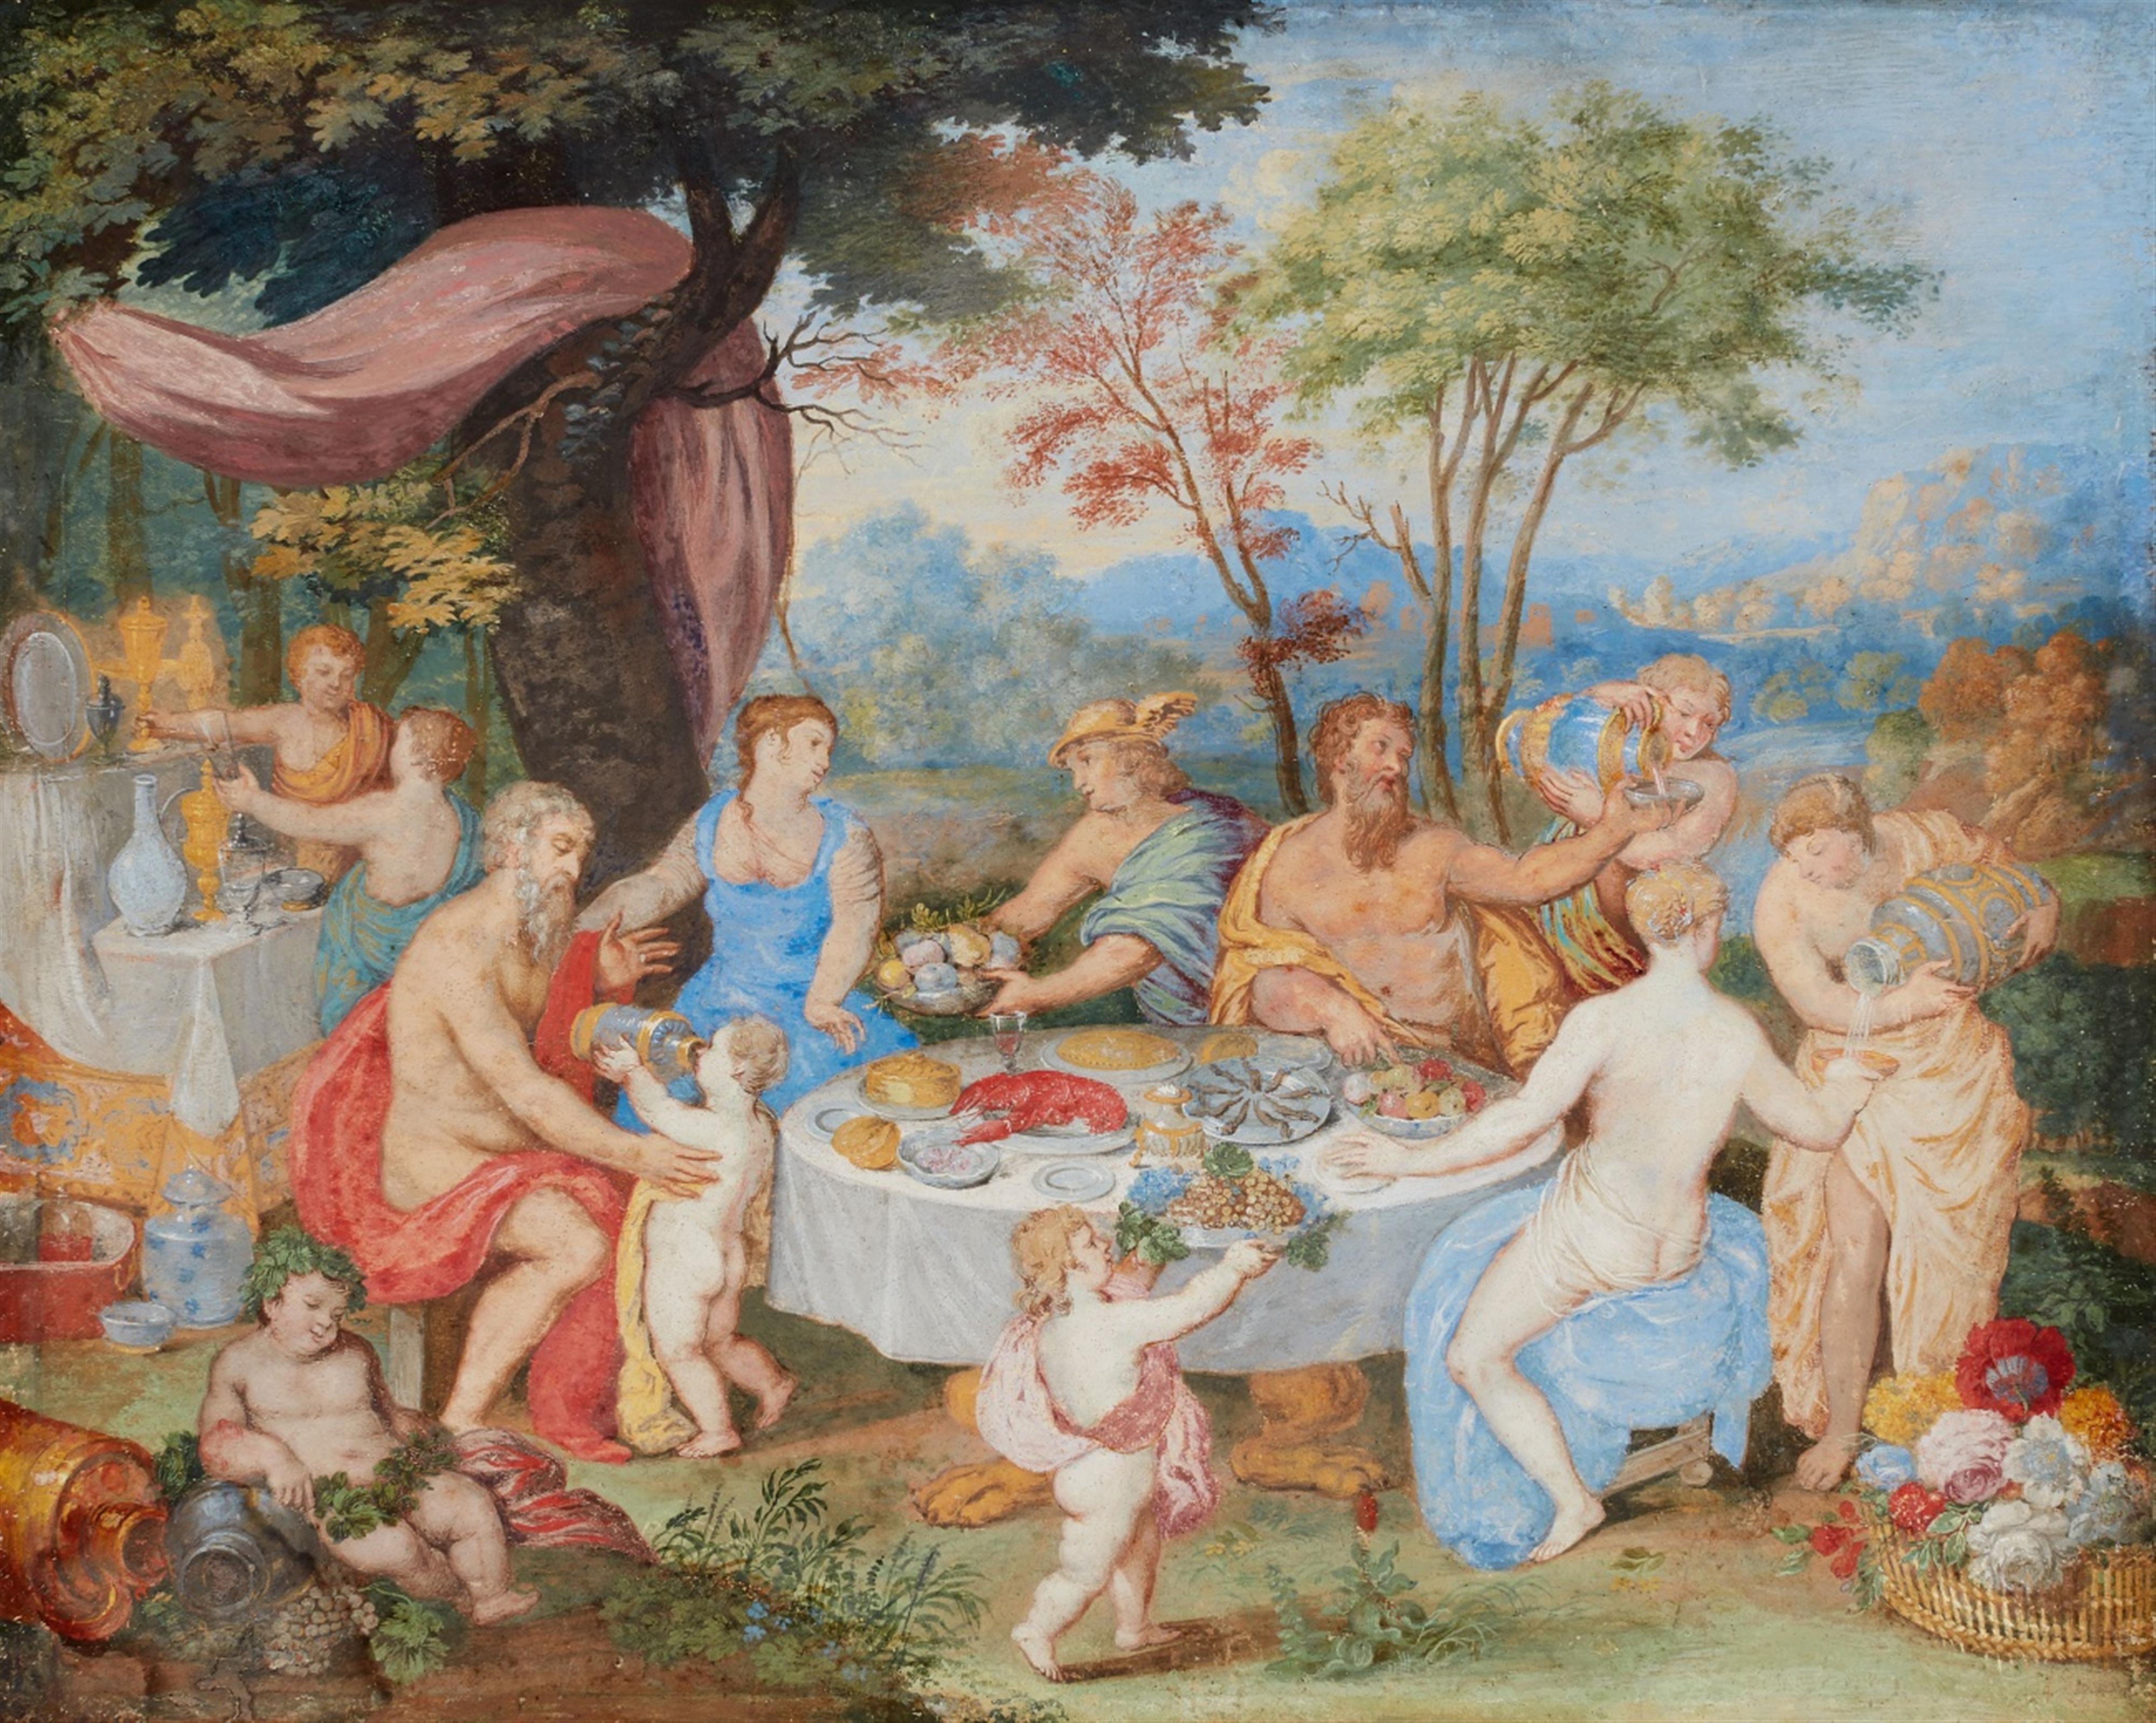 Flemish School of the 17th century - Feast of the Gods - image-1